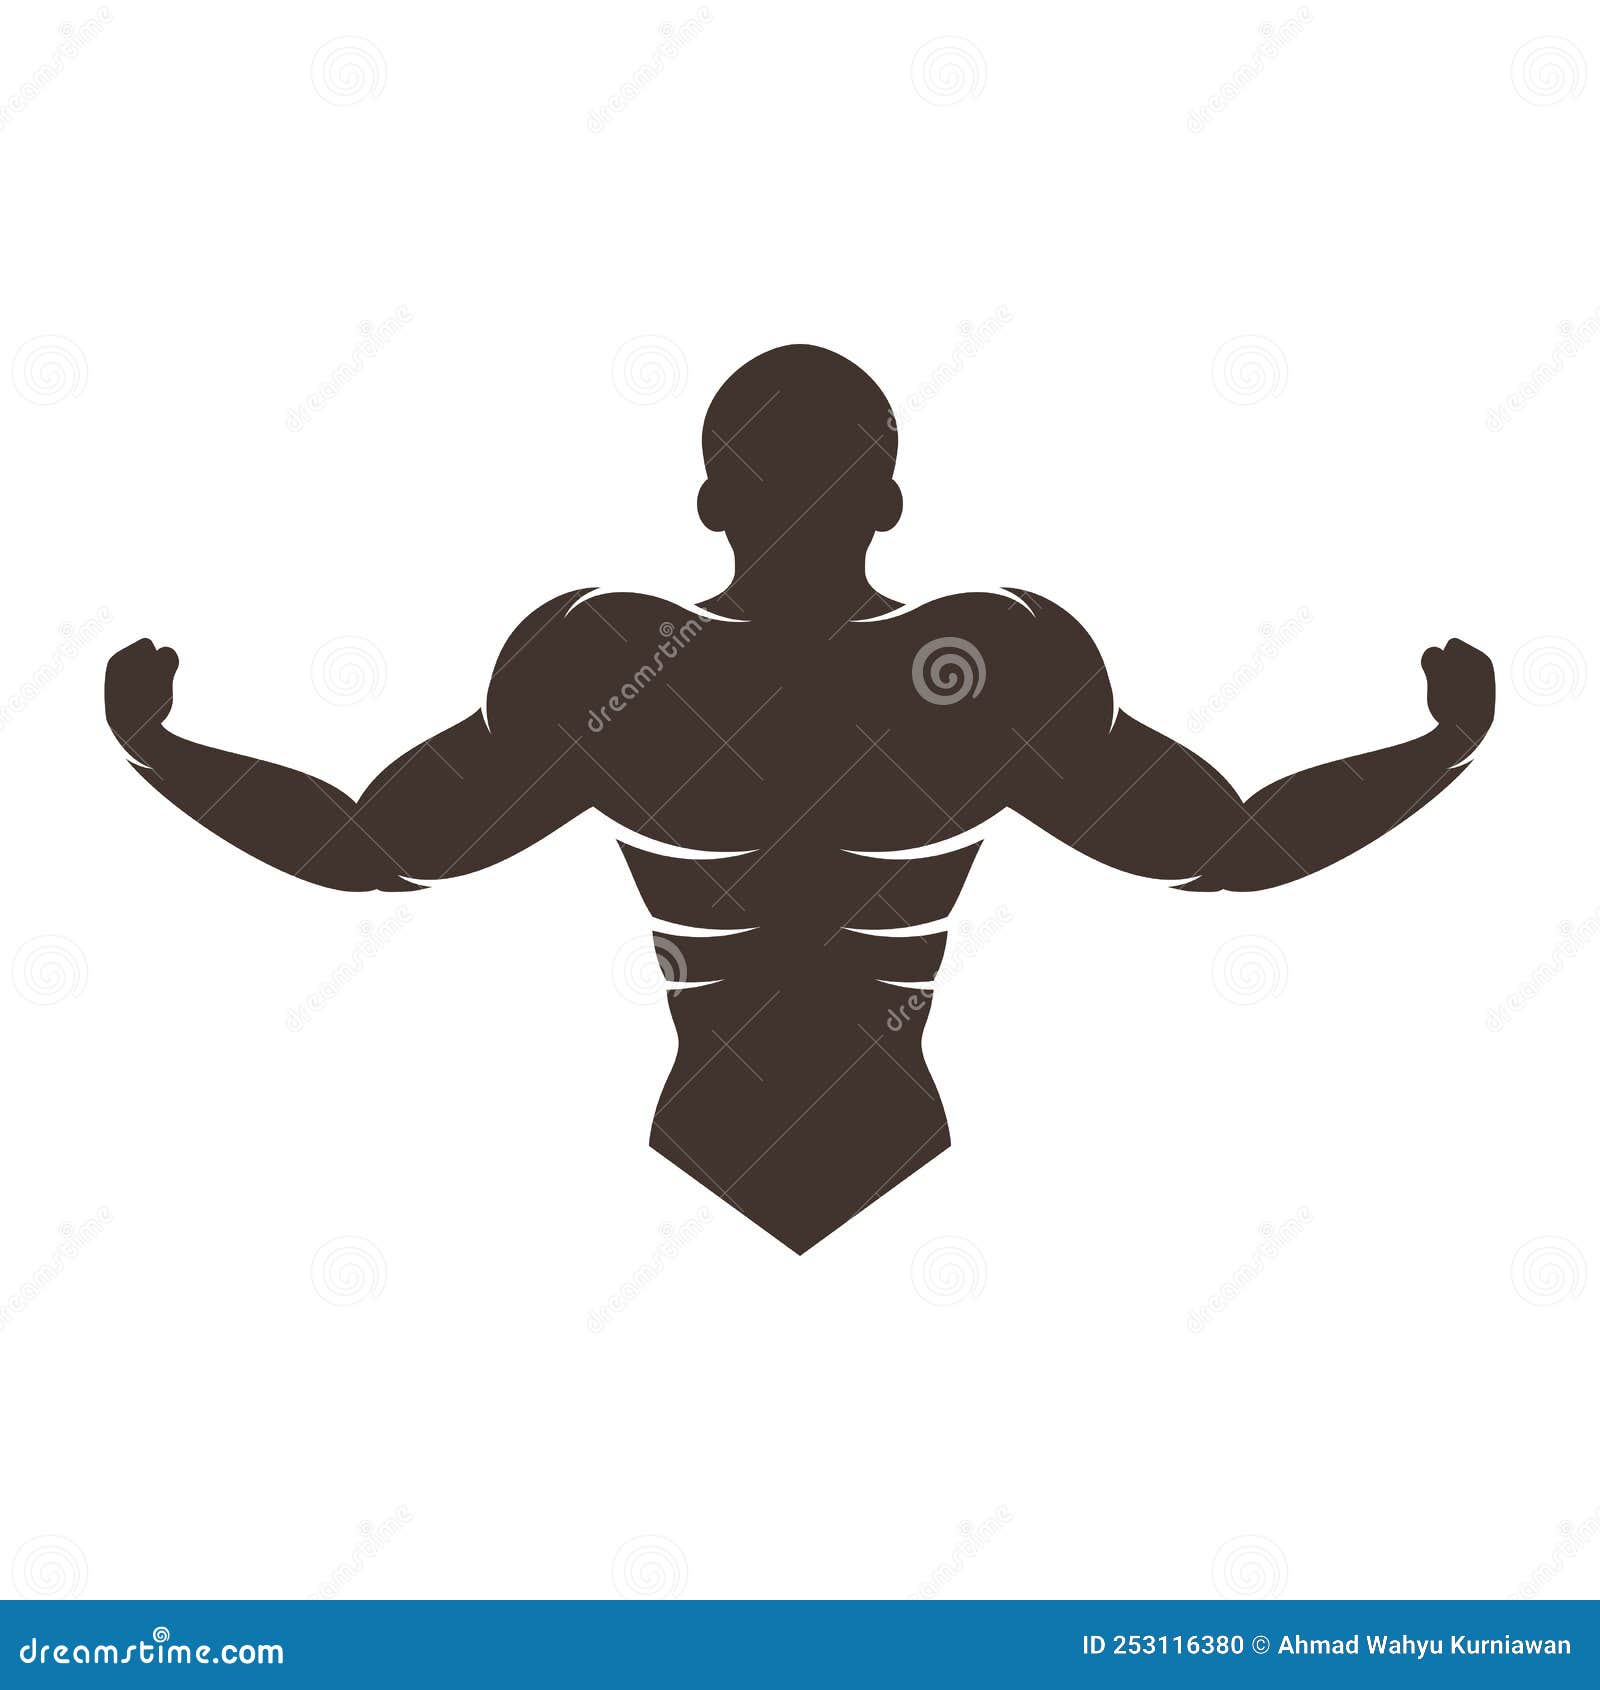 Gym logo vector stock vector. Illustration of people - 253116380